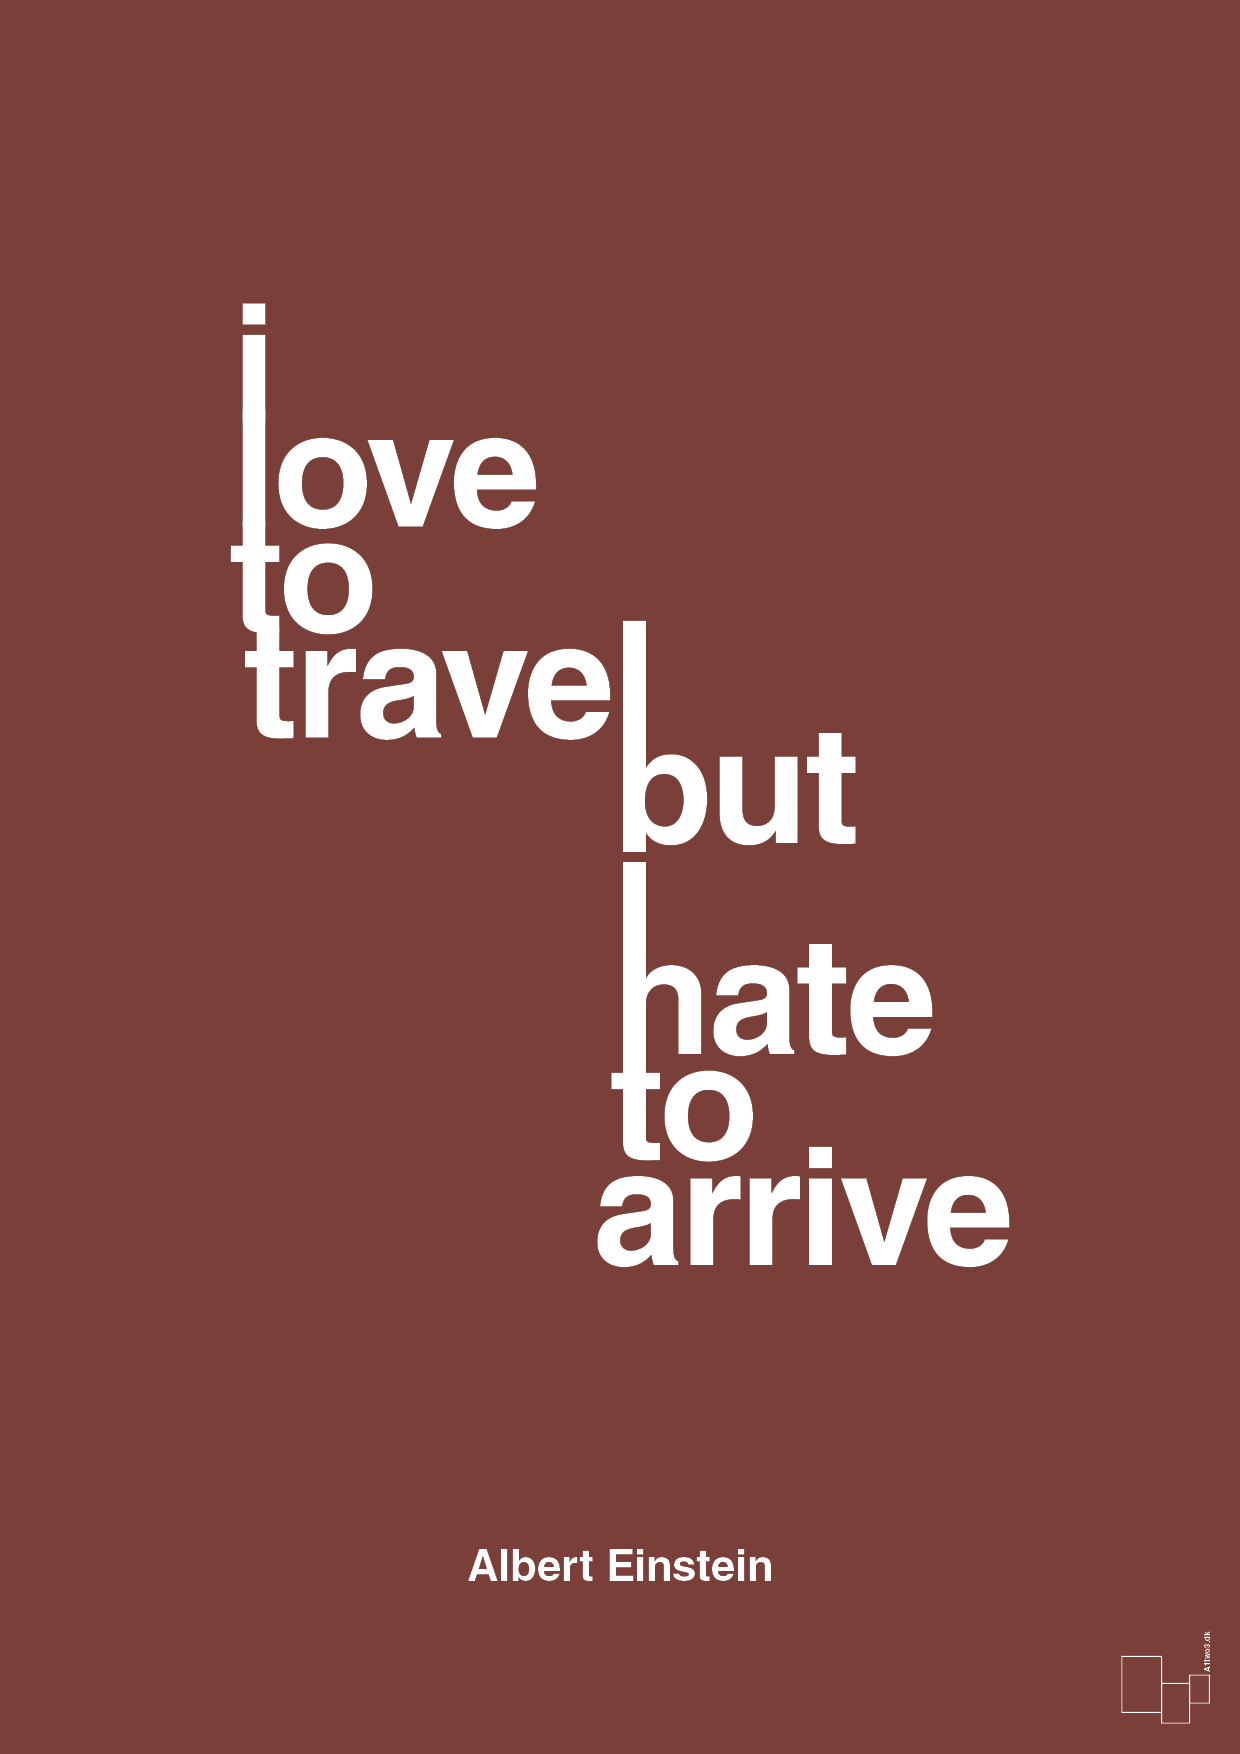 i love to travel but hate to arrive - Plakat med Citater i Red Pepper